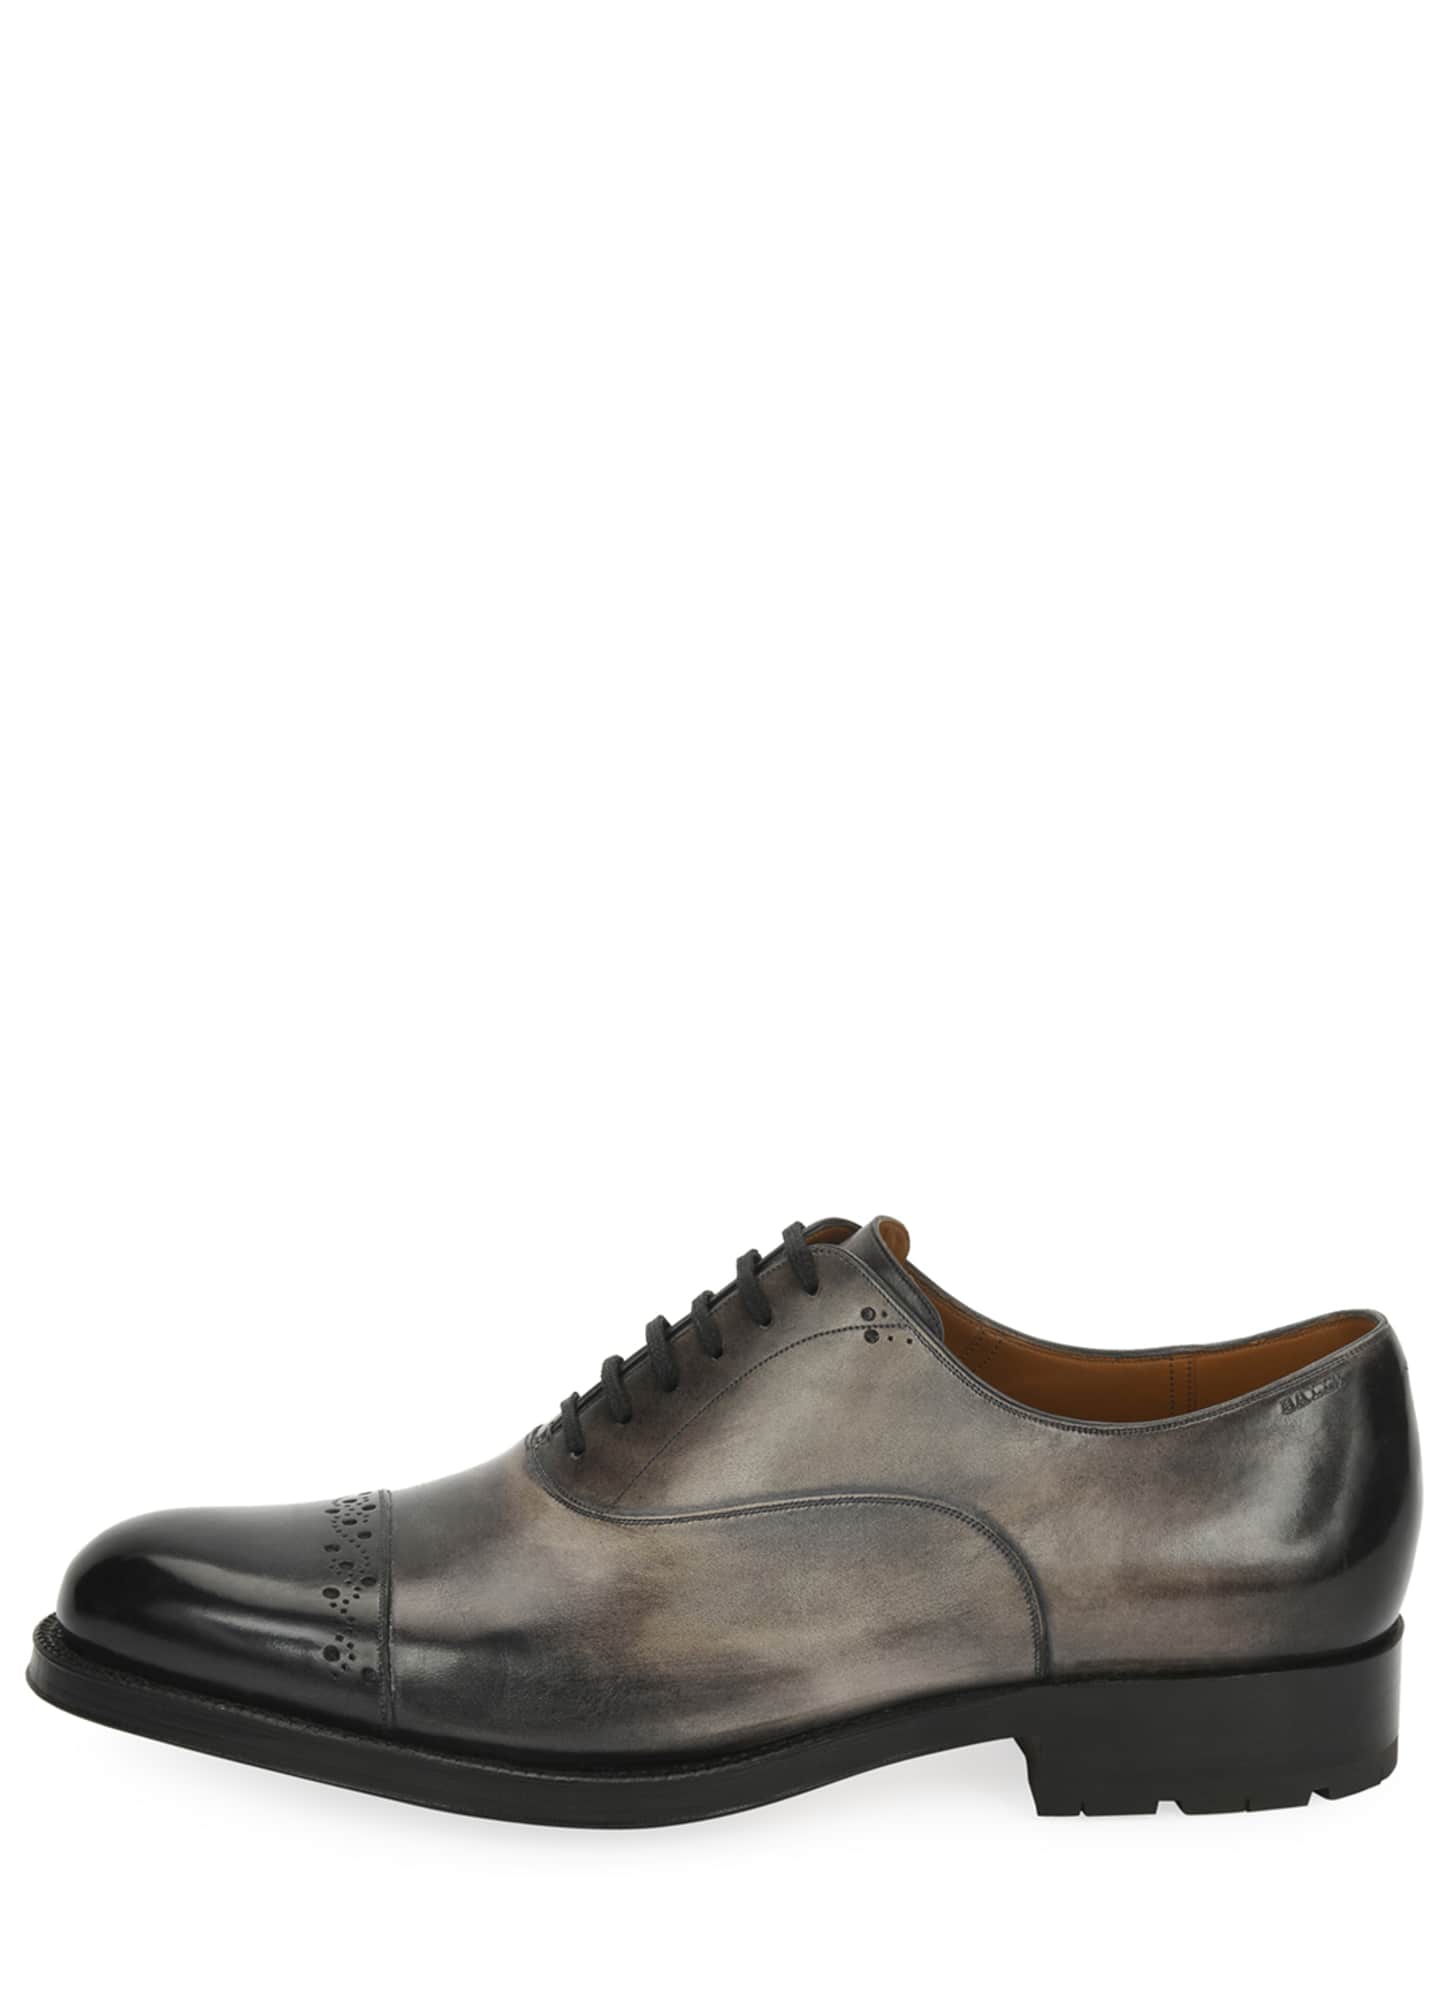 Bally Men's Luthar Injected-Sole Oxford - Bergdorf Goodman